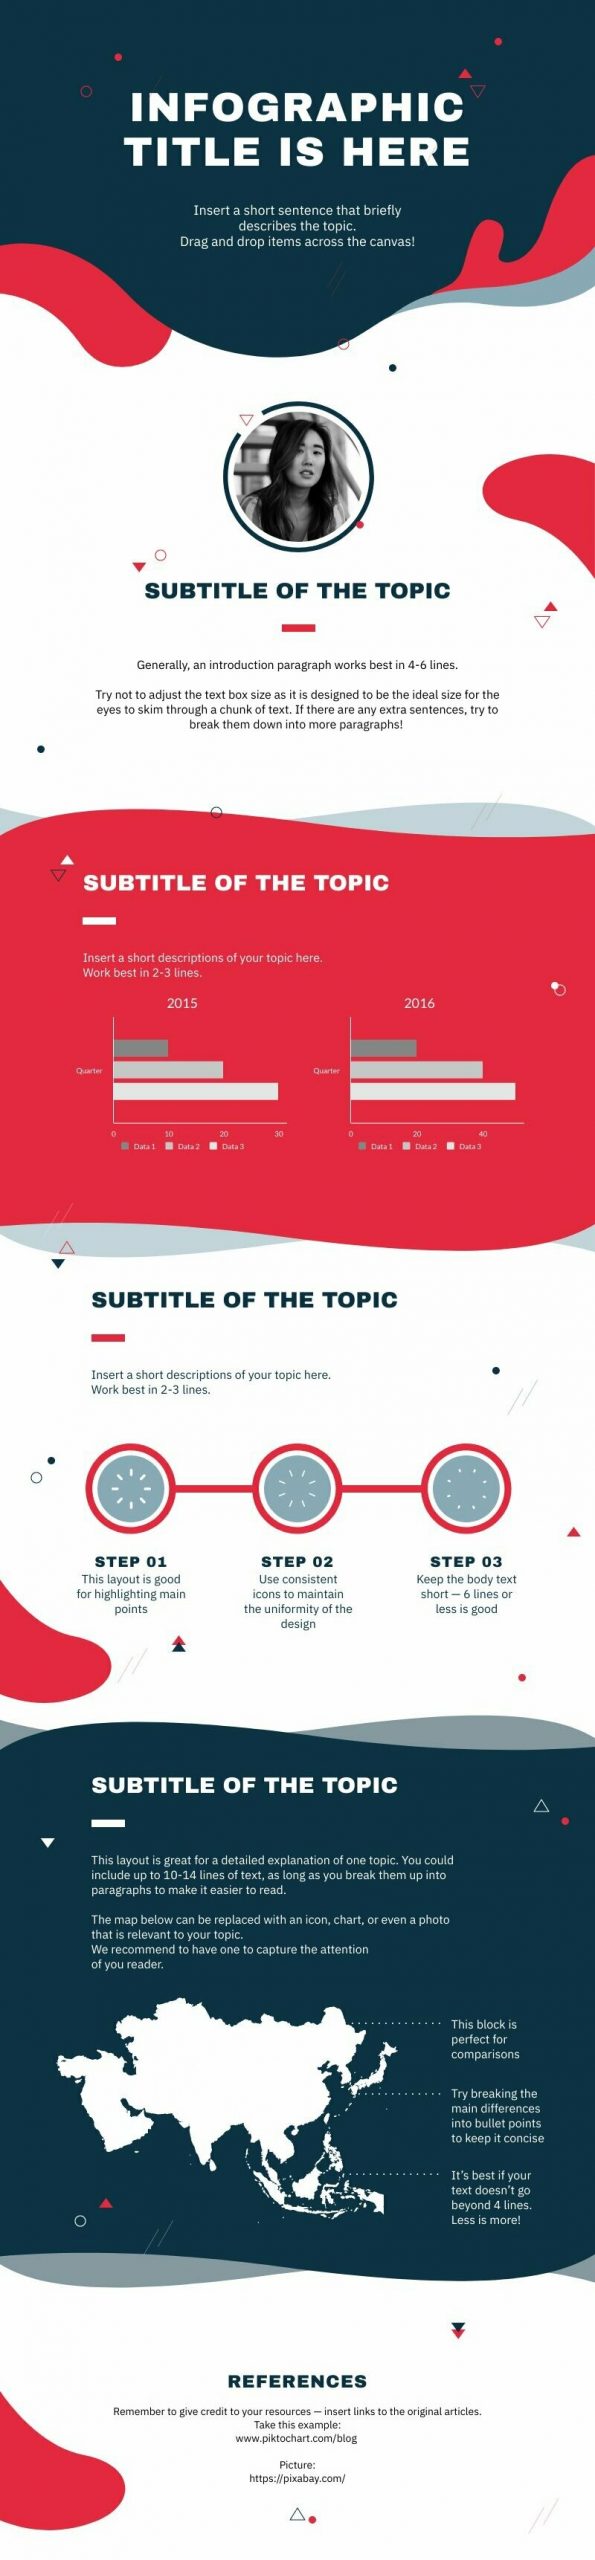 Self Introduction Informational Infographic Template